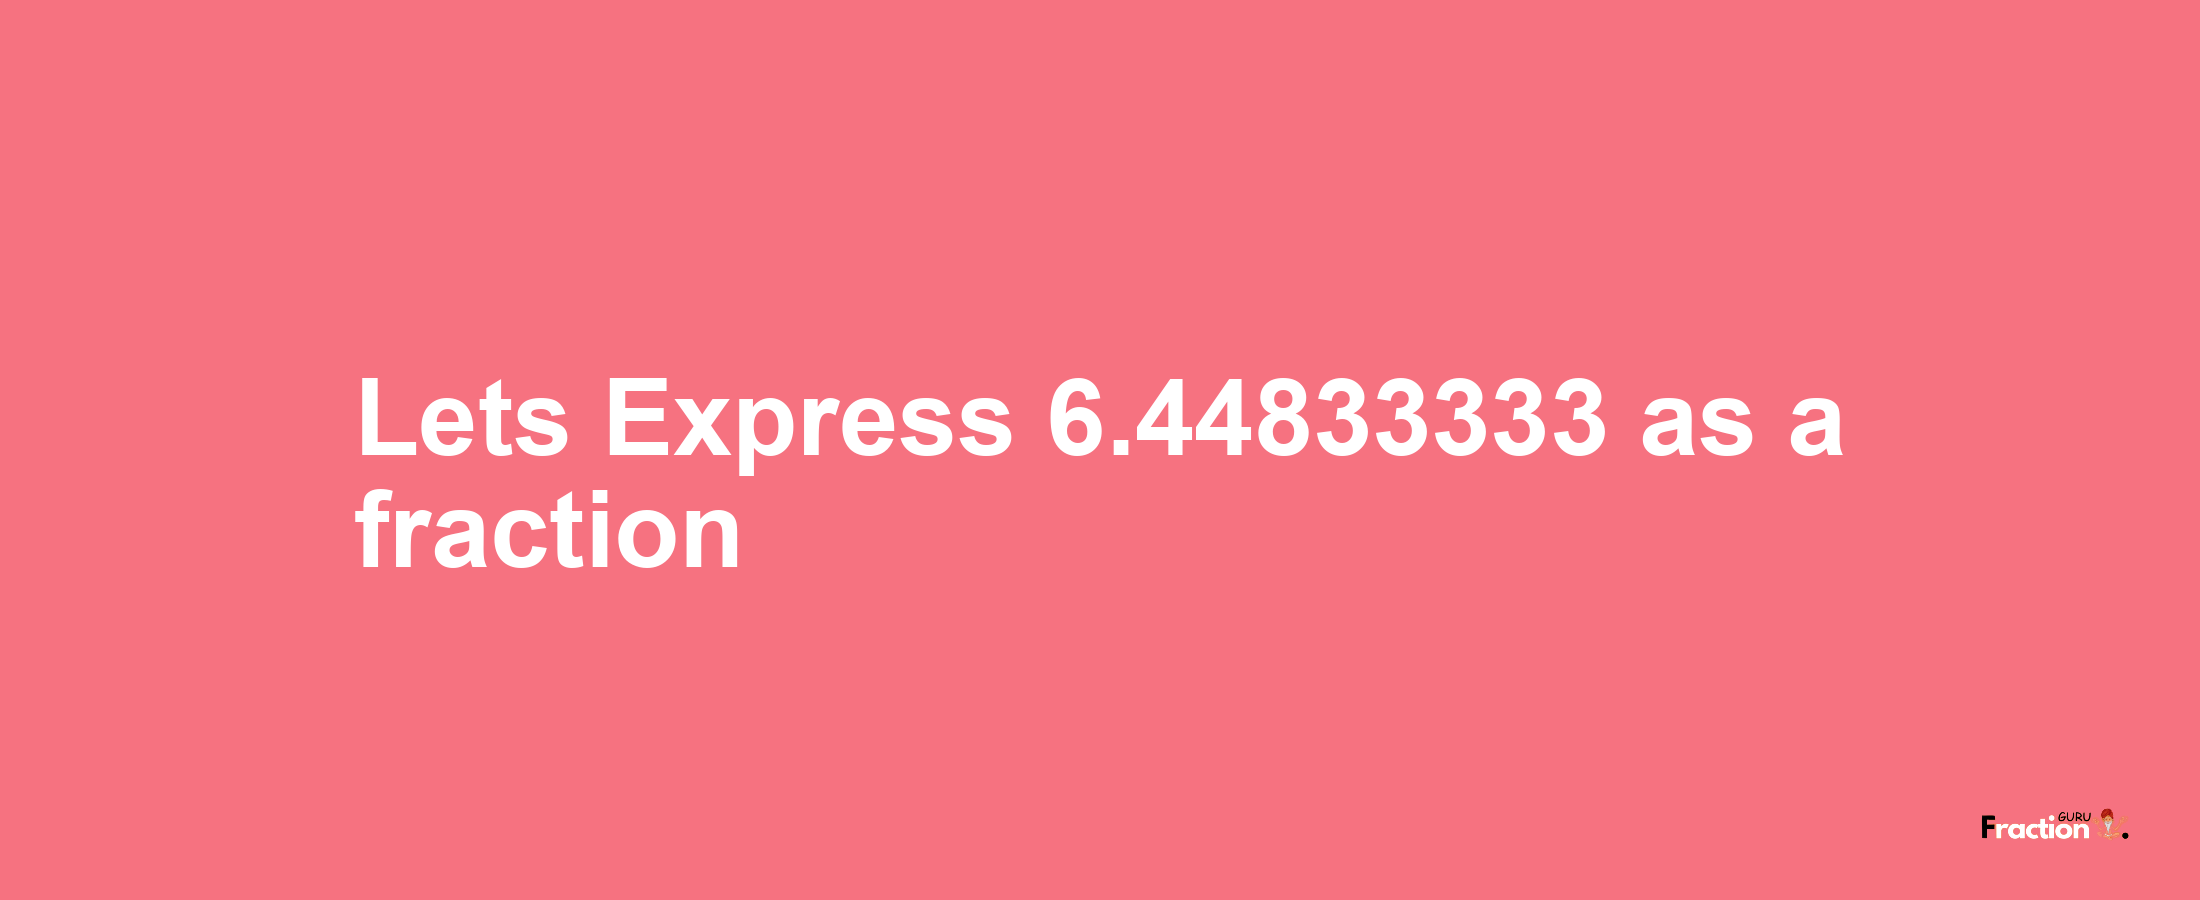 Lets Express 6.44833333 as afraction